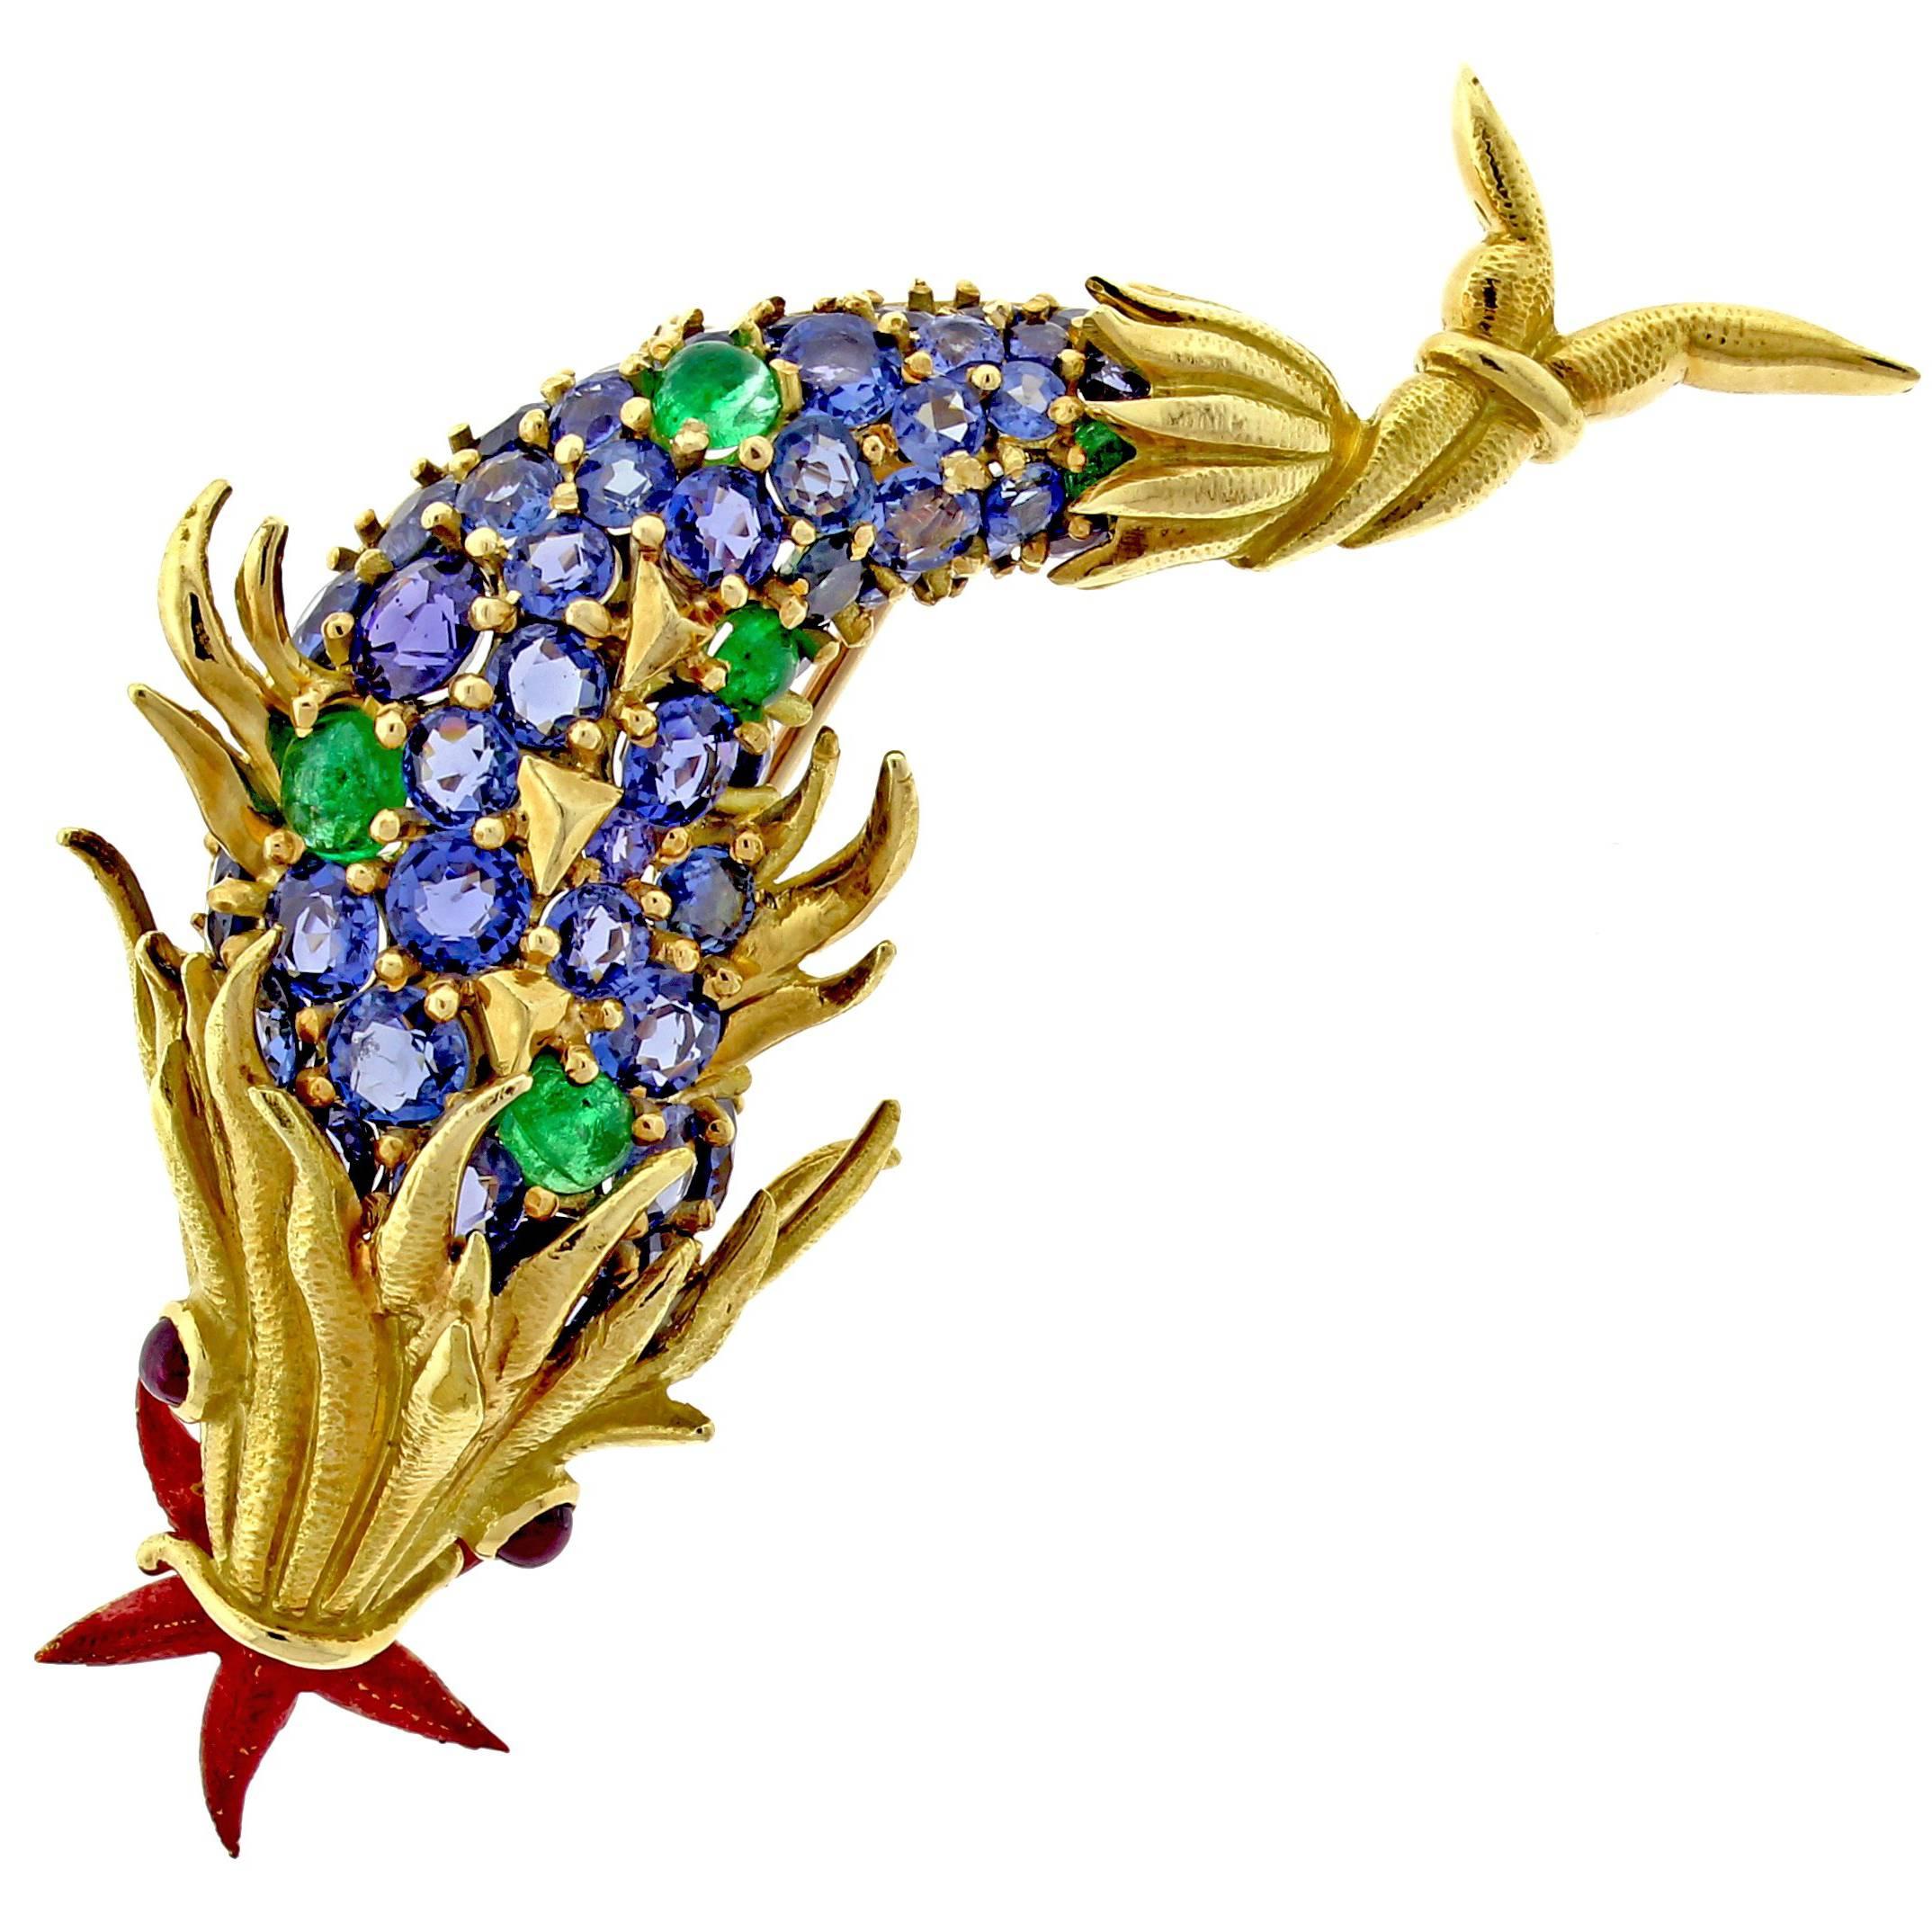  Schlumberger for Tiffany & Co. Sapphire and Emerald and Emerald Fish Brooch